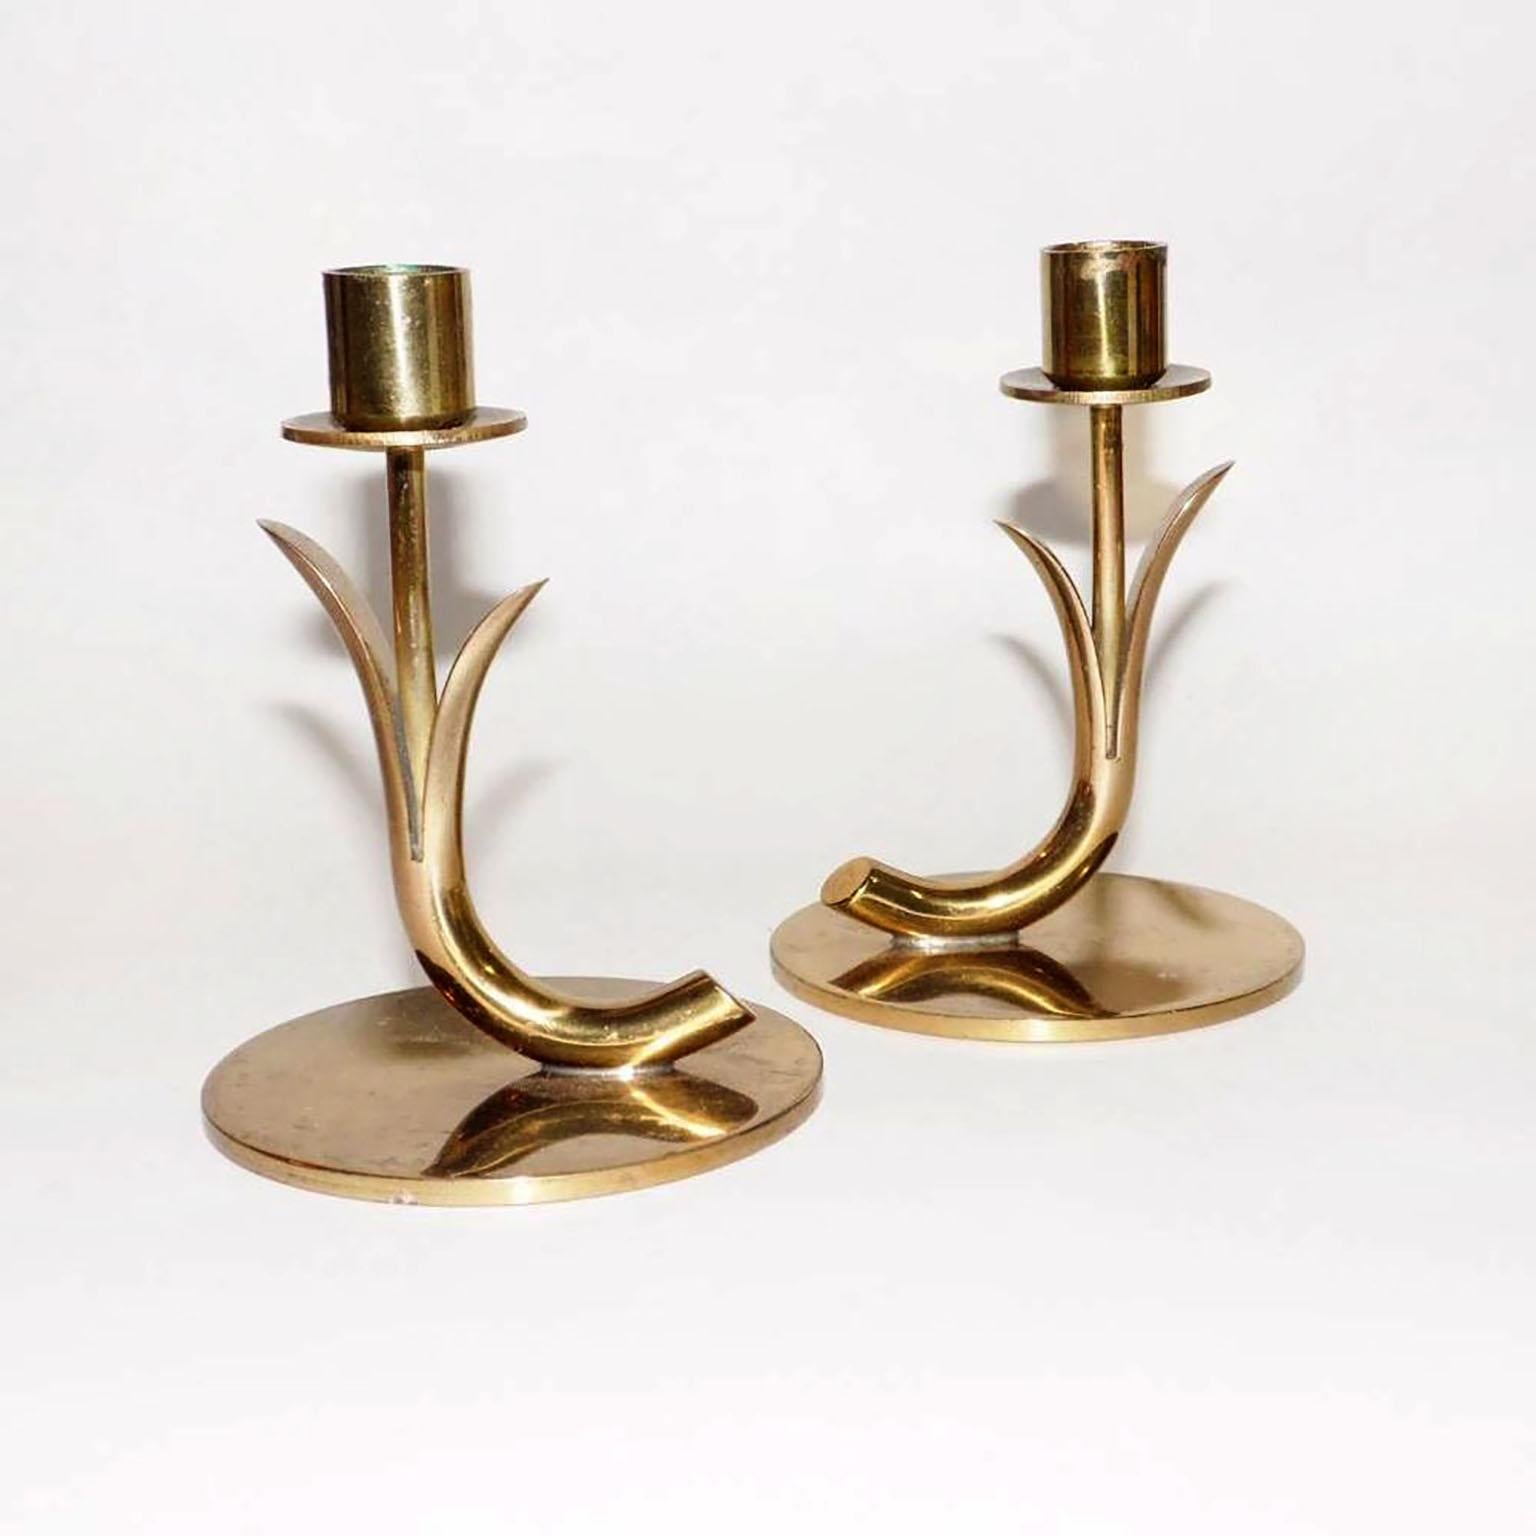 Scandinavian design pair of brass candleholders, designed by Gunnar Ander for Ystad Metall, Sweden, mid-1900s.
Very good used condition, with patina to the brass.
Dimensions: 8.5 cm height.
  